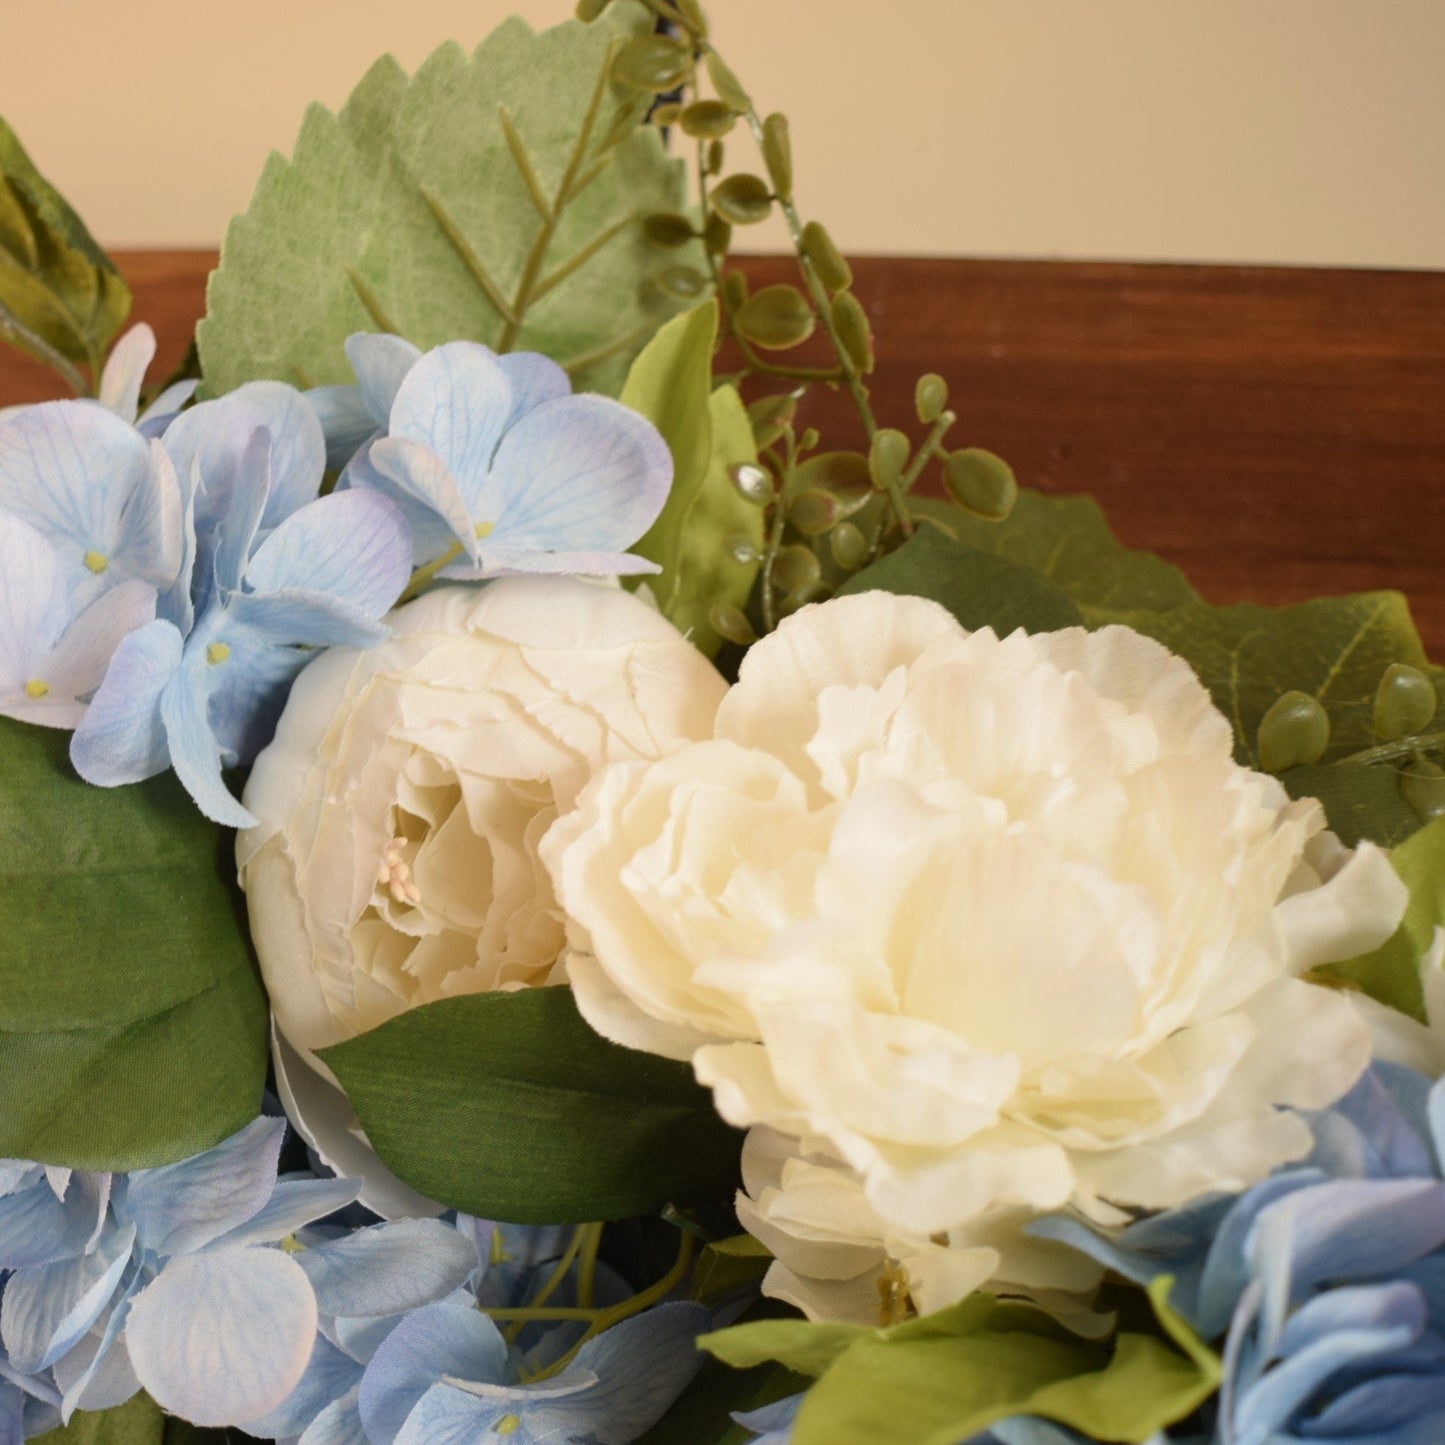 Load image into Gallery viewer, Blue Hydrangea Wreath
